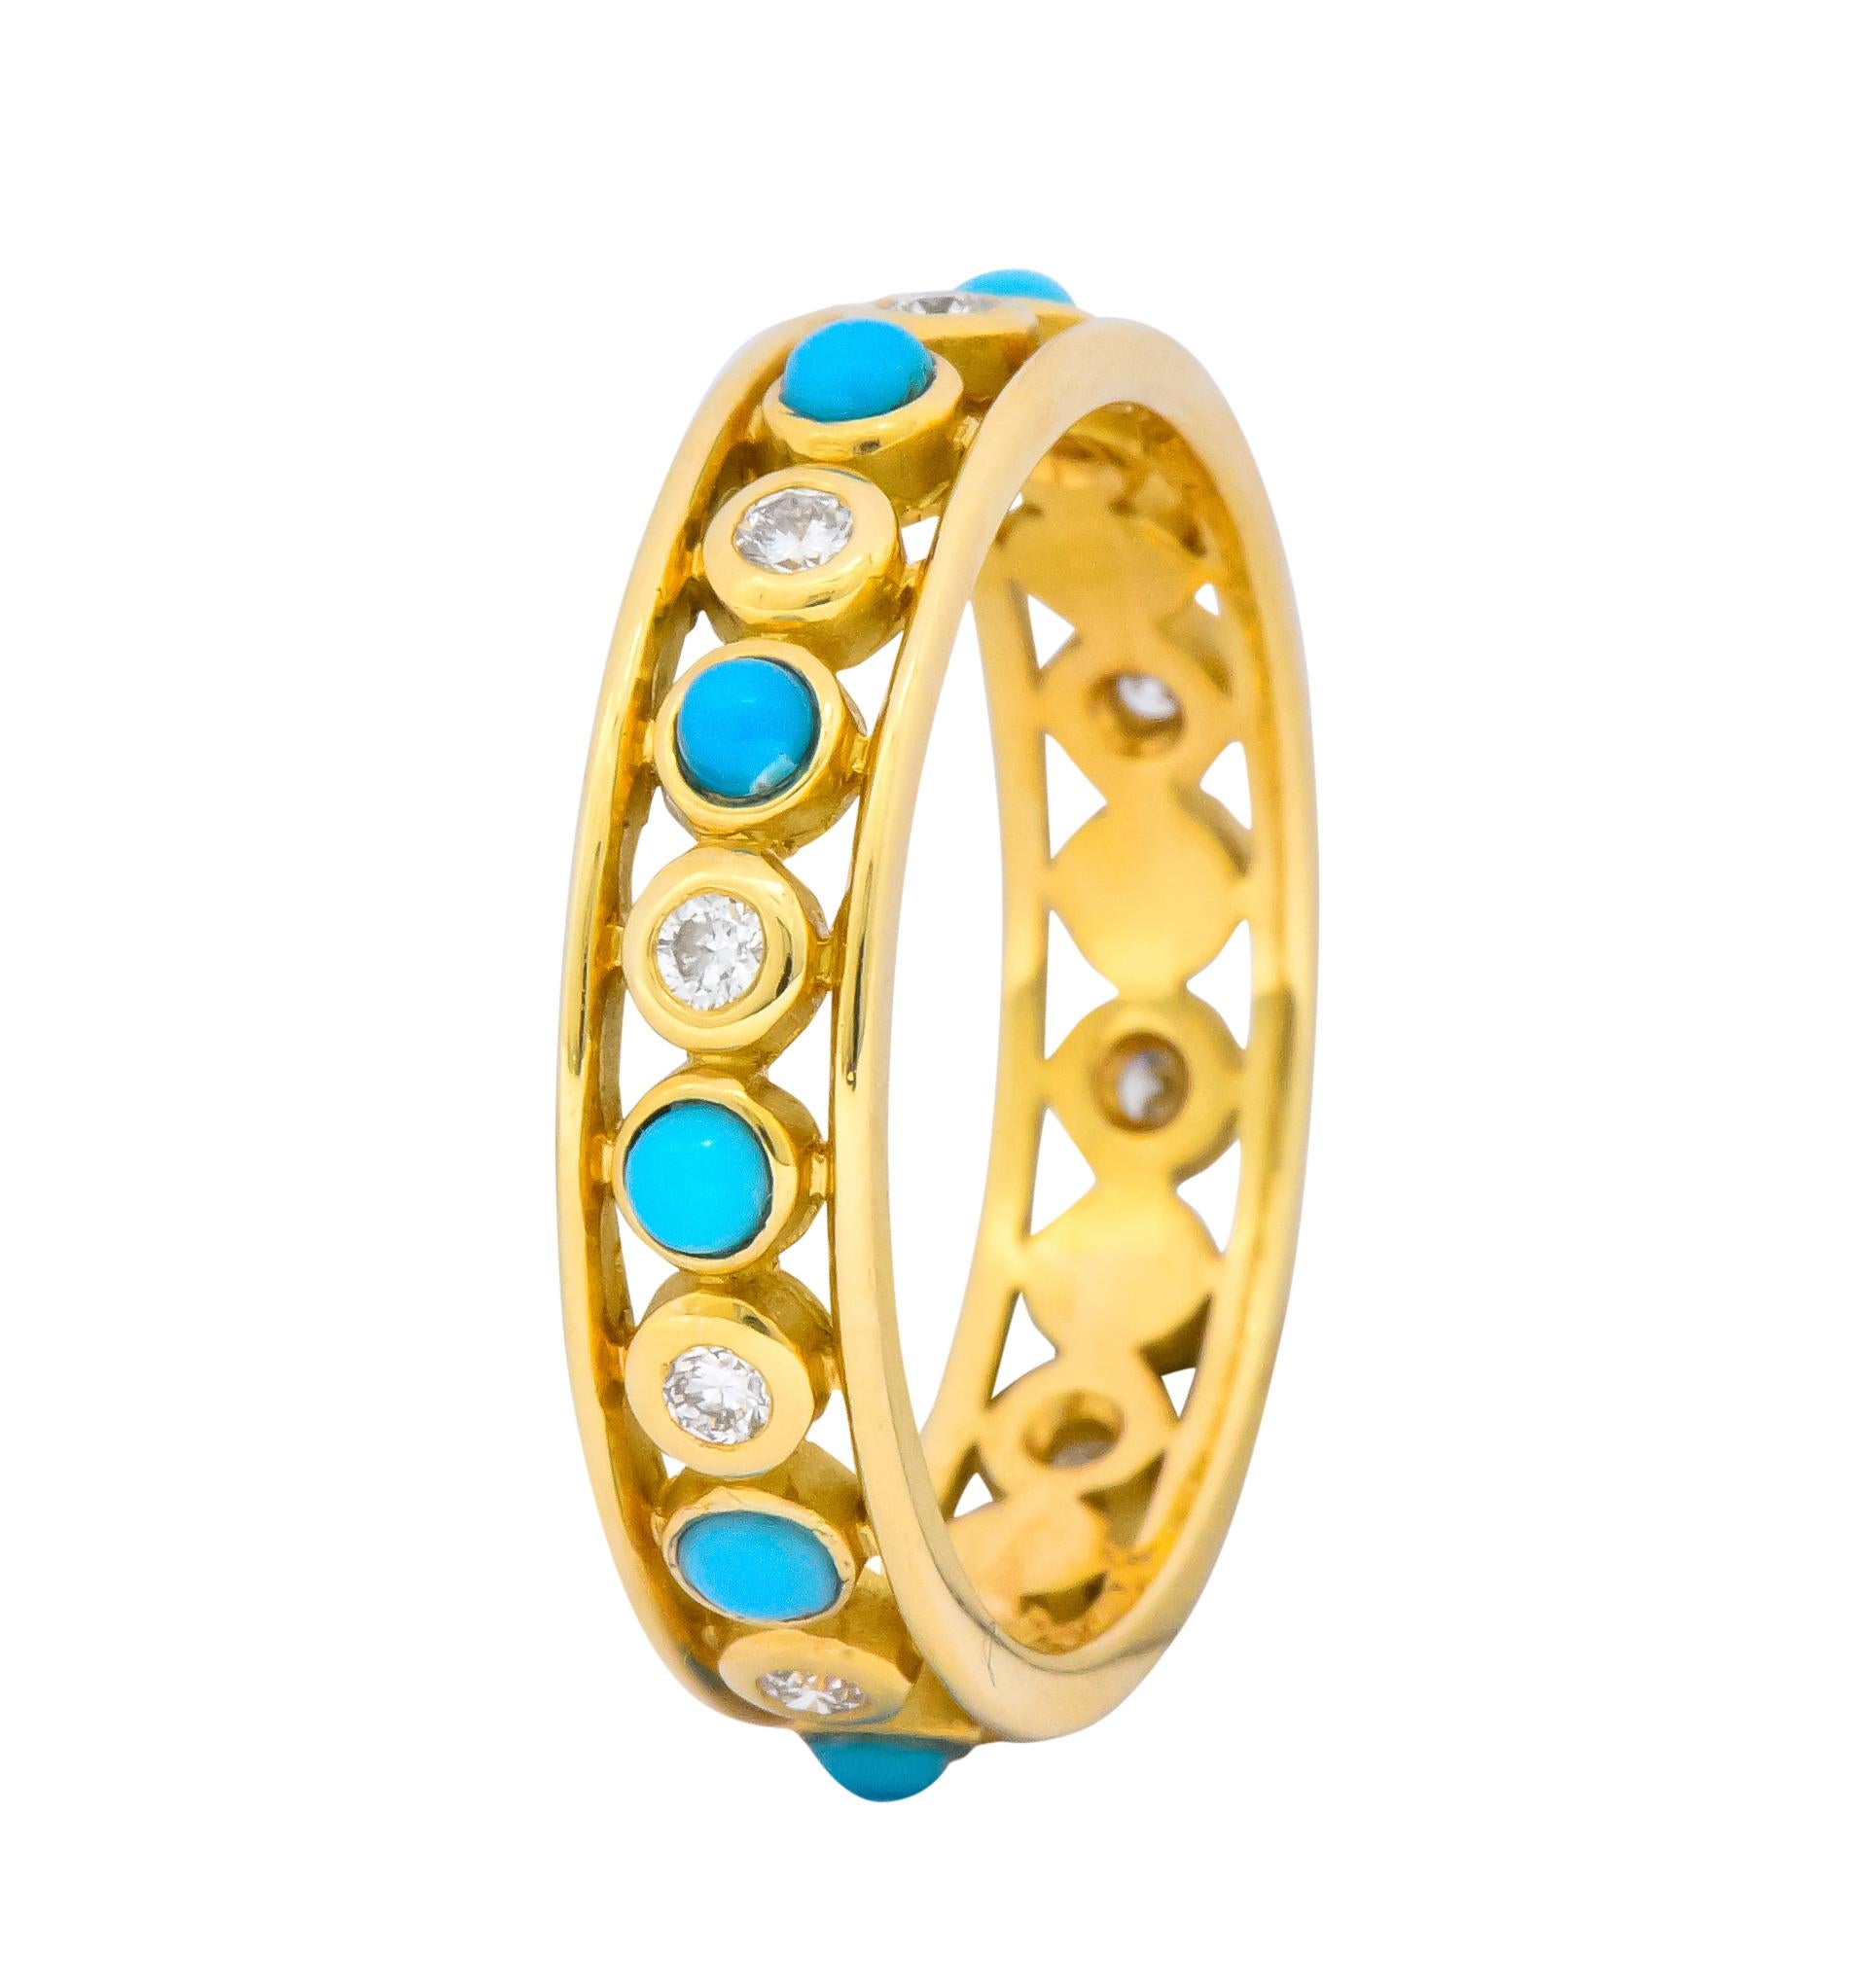 Alternating bezel set round brilliant cut diamonds and round cabochon turquoise

Ten round brilliant cut diamonds weighing approximately 0.30 carat, G/H color and VS clarity

Open-work gold with highly polished edges

Fully signed Paloma Picasso, T